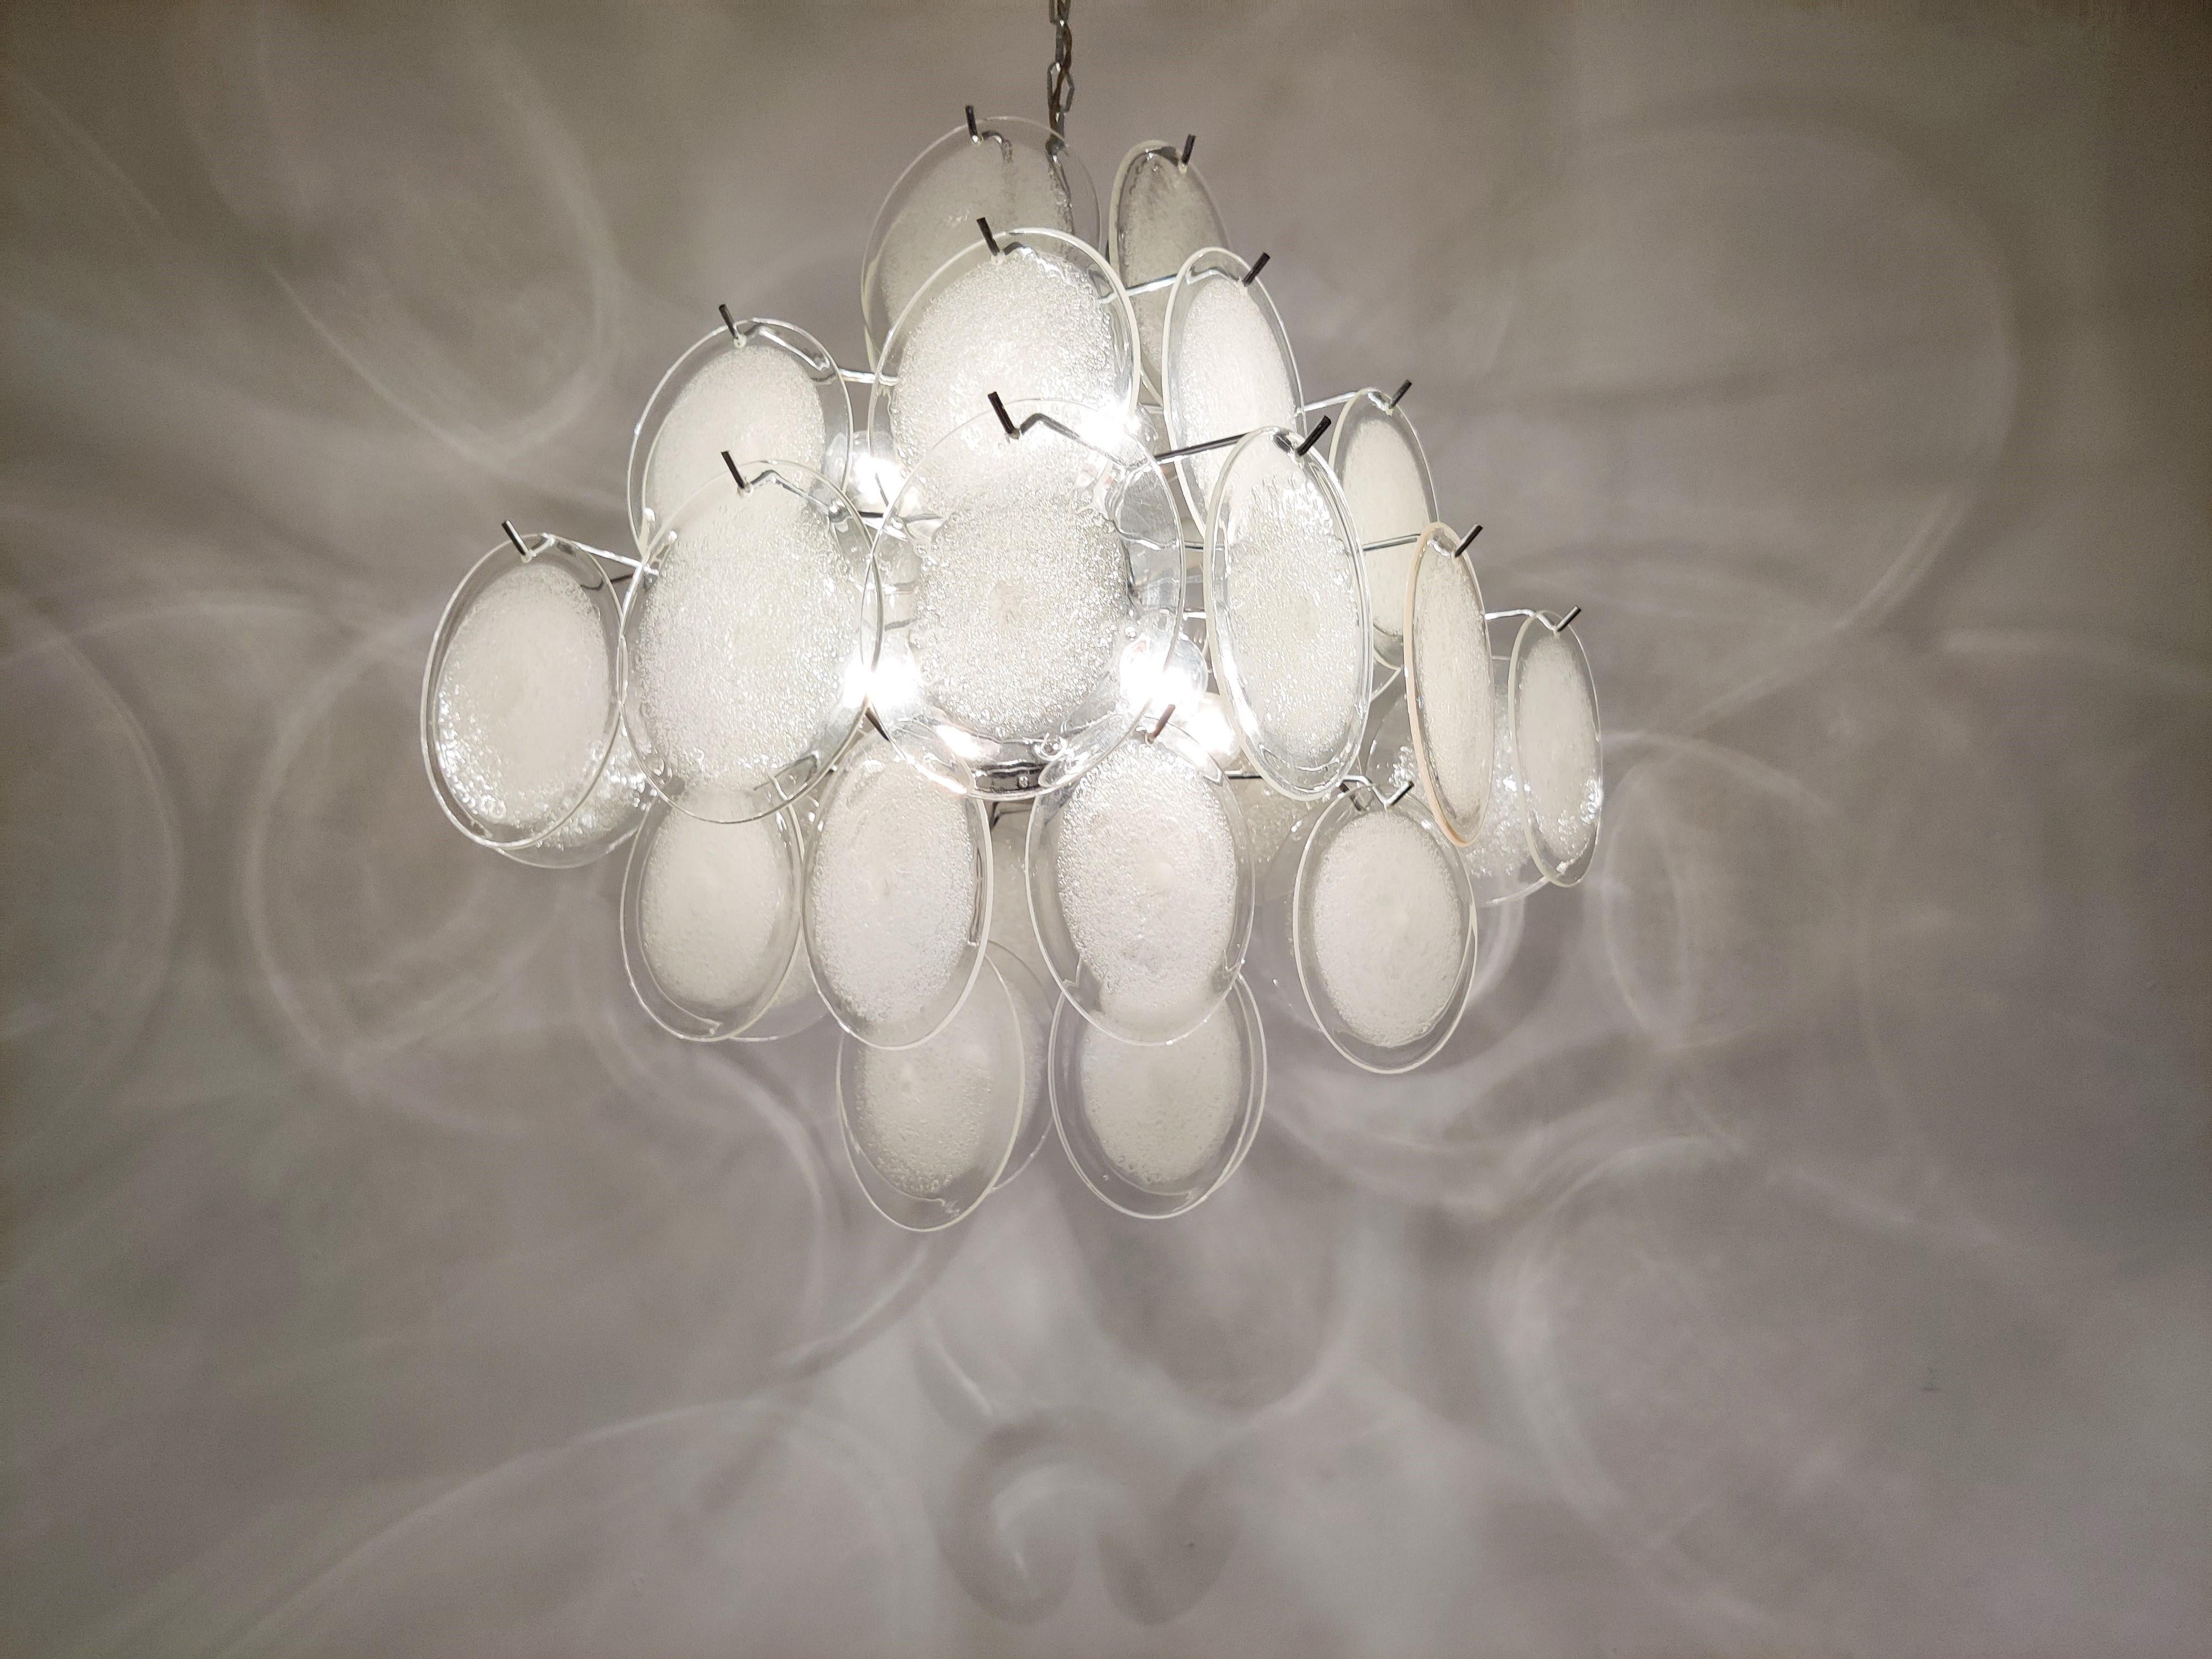 Beautiful chandelier by Vistosi with Murano glass discs.

All discs are handmade which is why none are exactly the same.

The chandelier is in good condition.

The fixture emits a beautiful light and works with regular E14 light